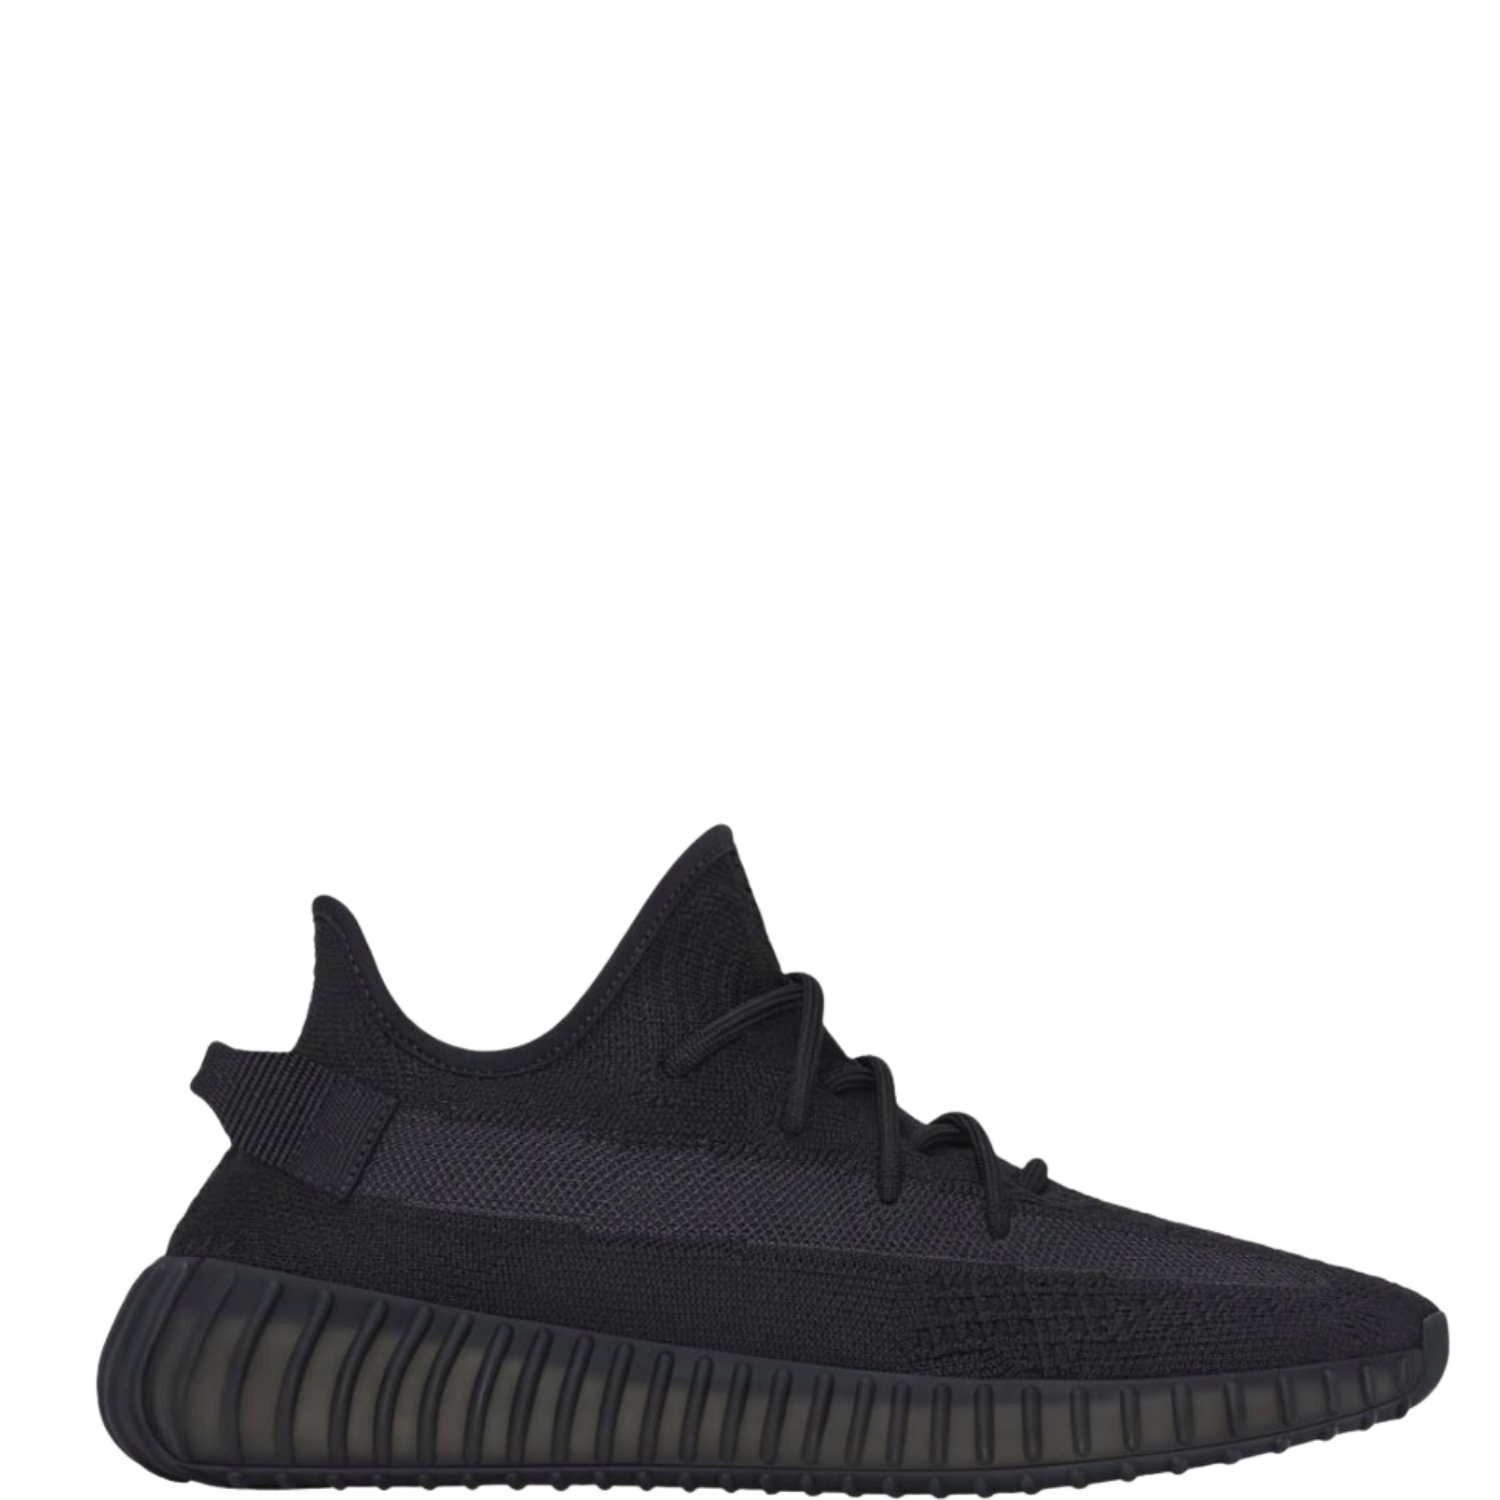 Yeezy Boost 350 V2 Onyx / HQ4540 - - SneakerMood - Your favorite sneaker provider